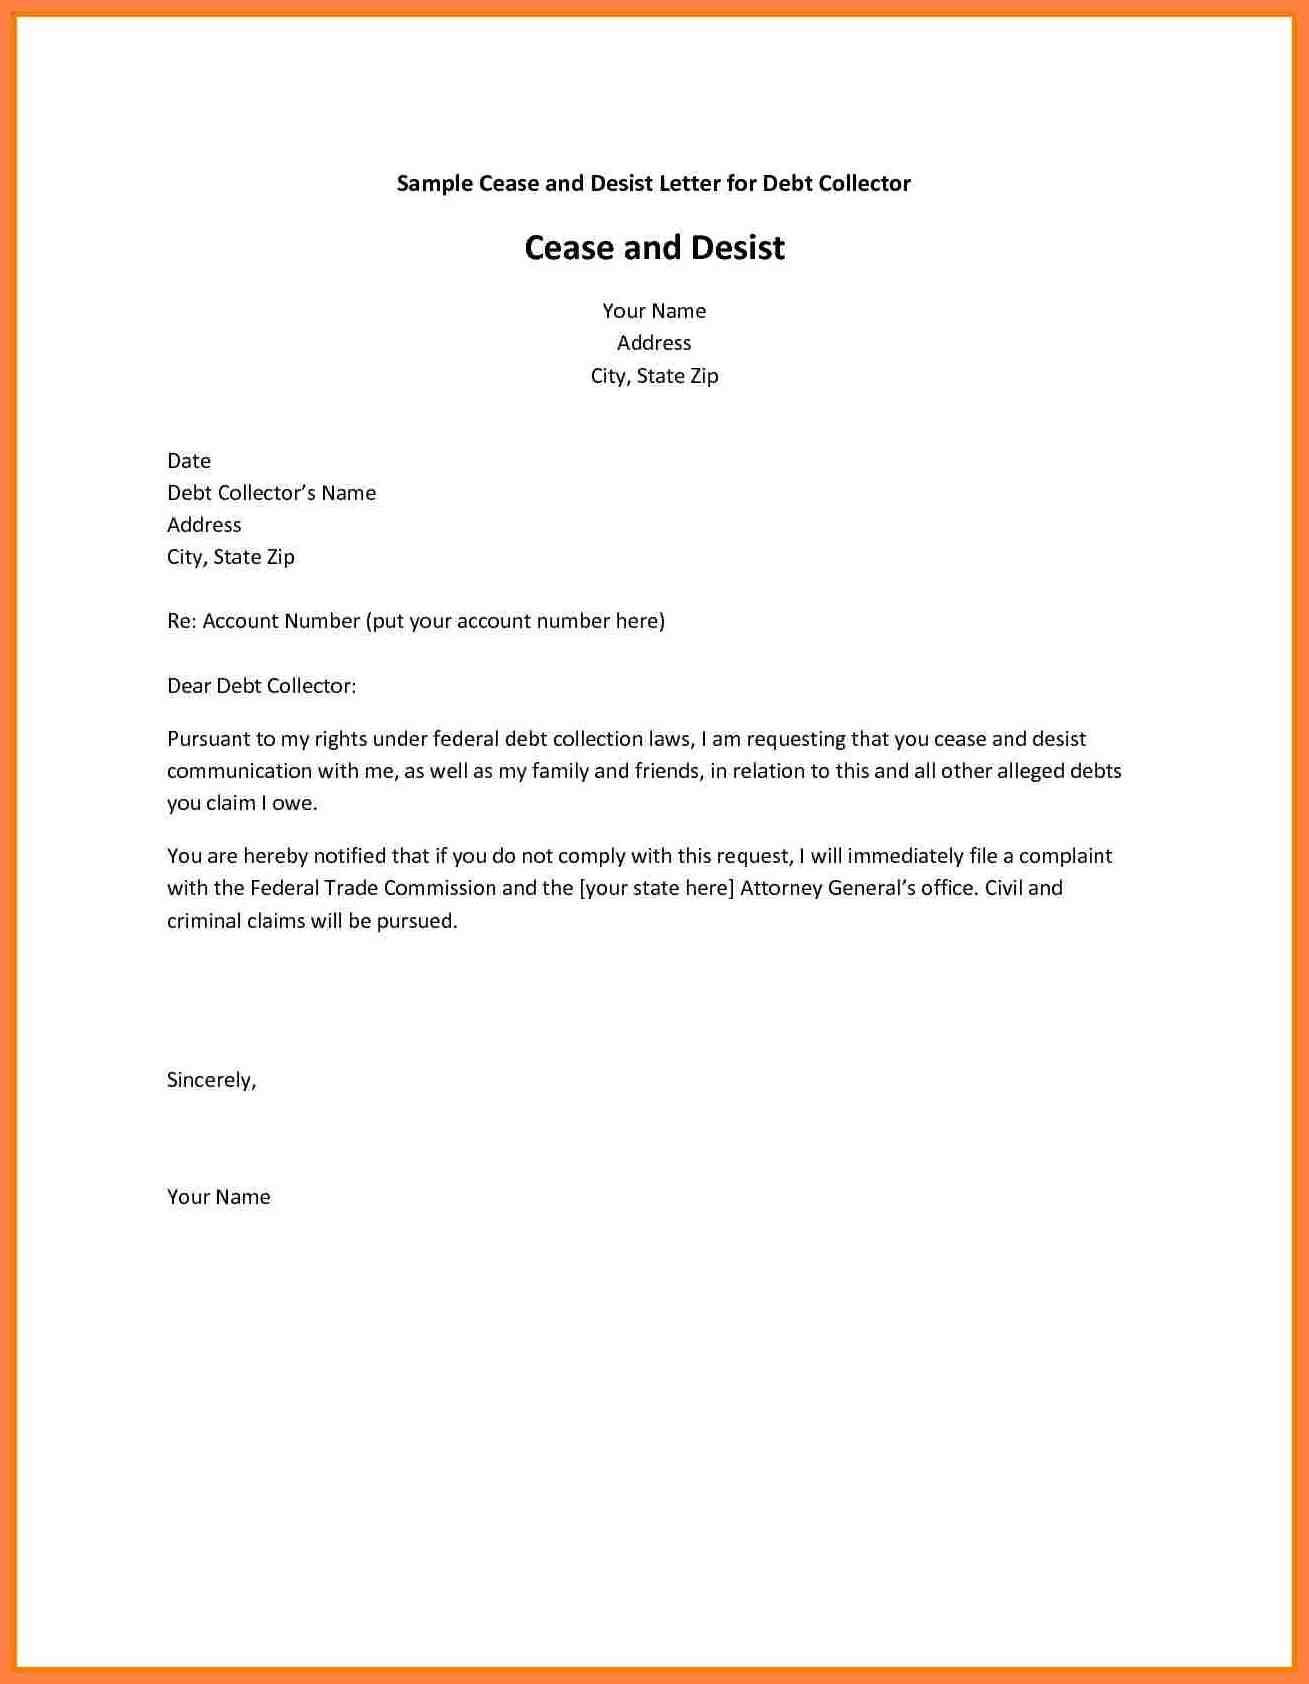 cease and desist creditor letter template example-Cease and Desist Letter Sample Lovely Best Debt Collection Cease and Desist Letter Template 2-o